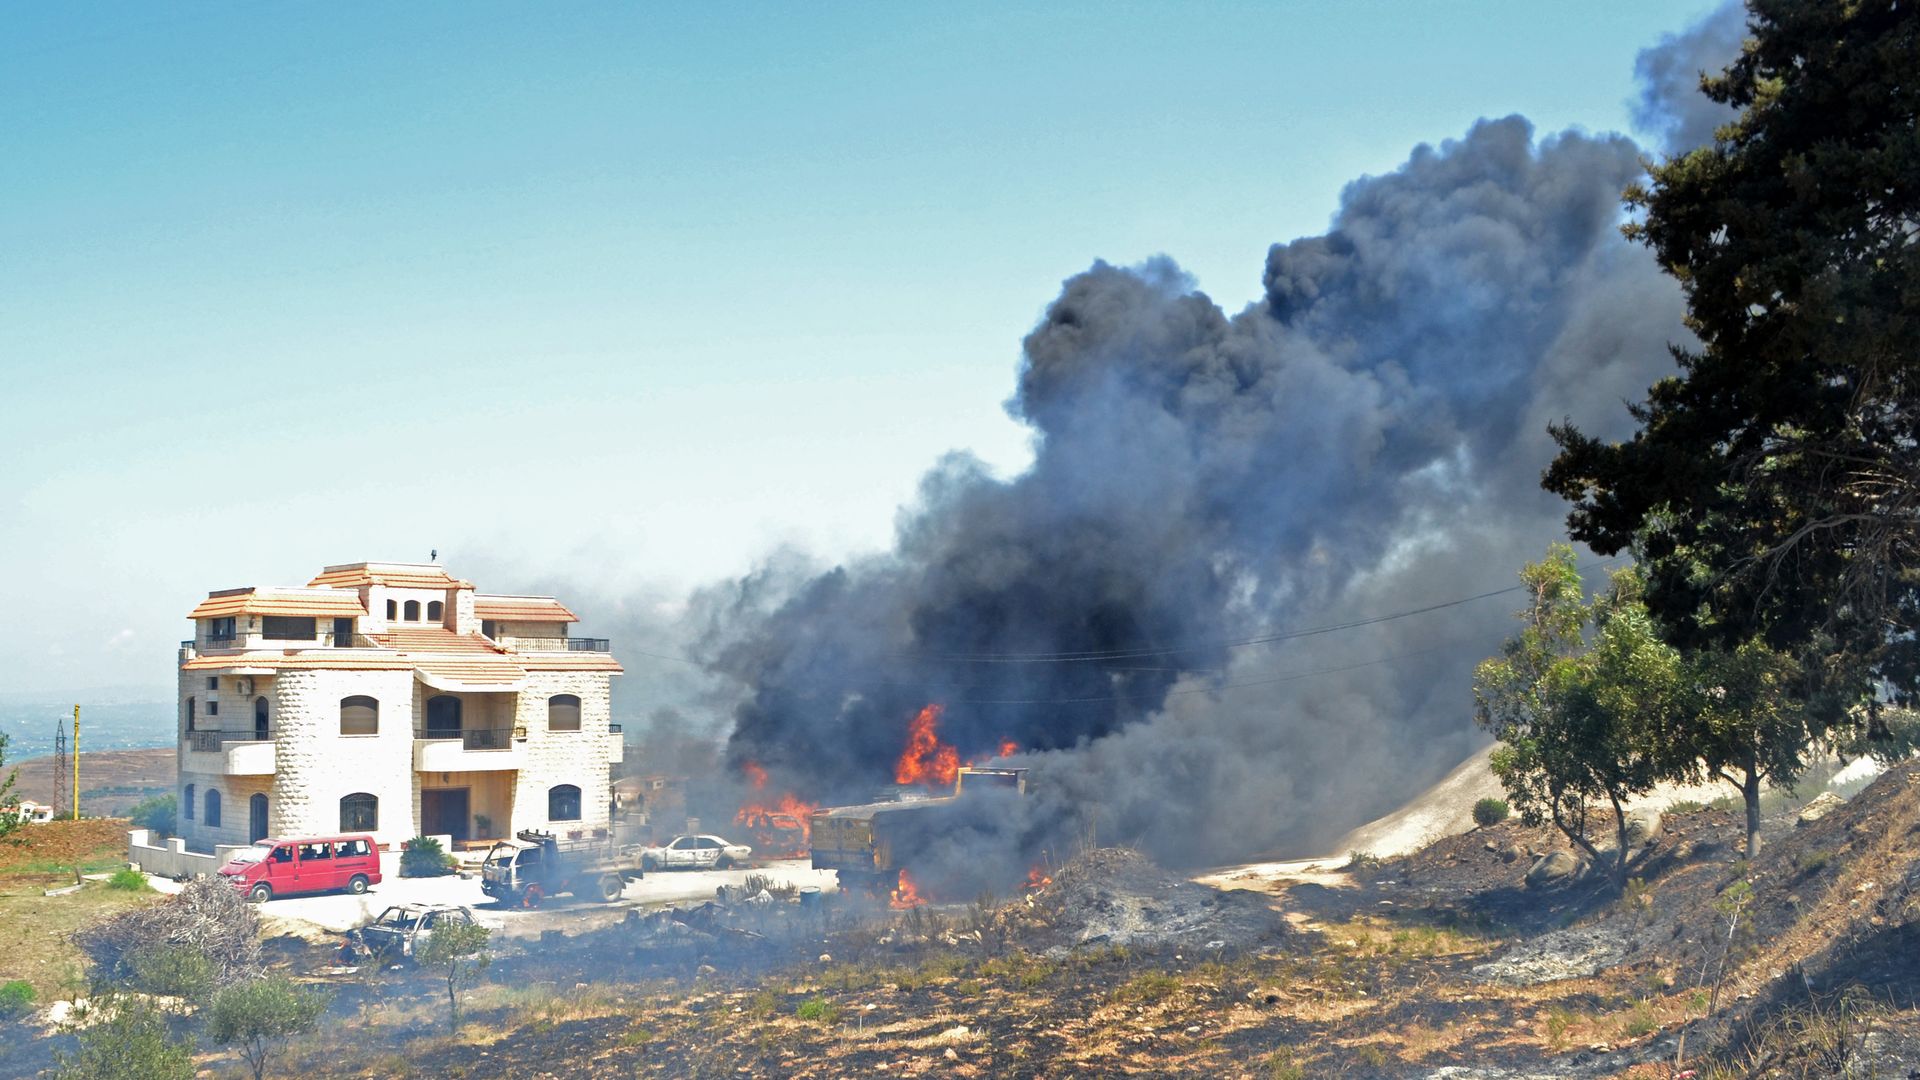 Vehicles burn outside the reported home of the lot owner, where the exploded fuel tank was placed, in the village of Tlel in Lebanon's northern region of Akkar on August 15